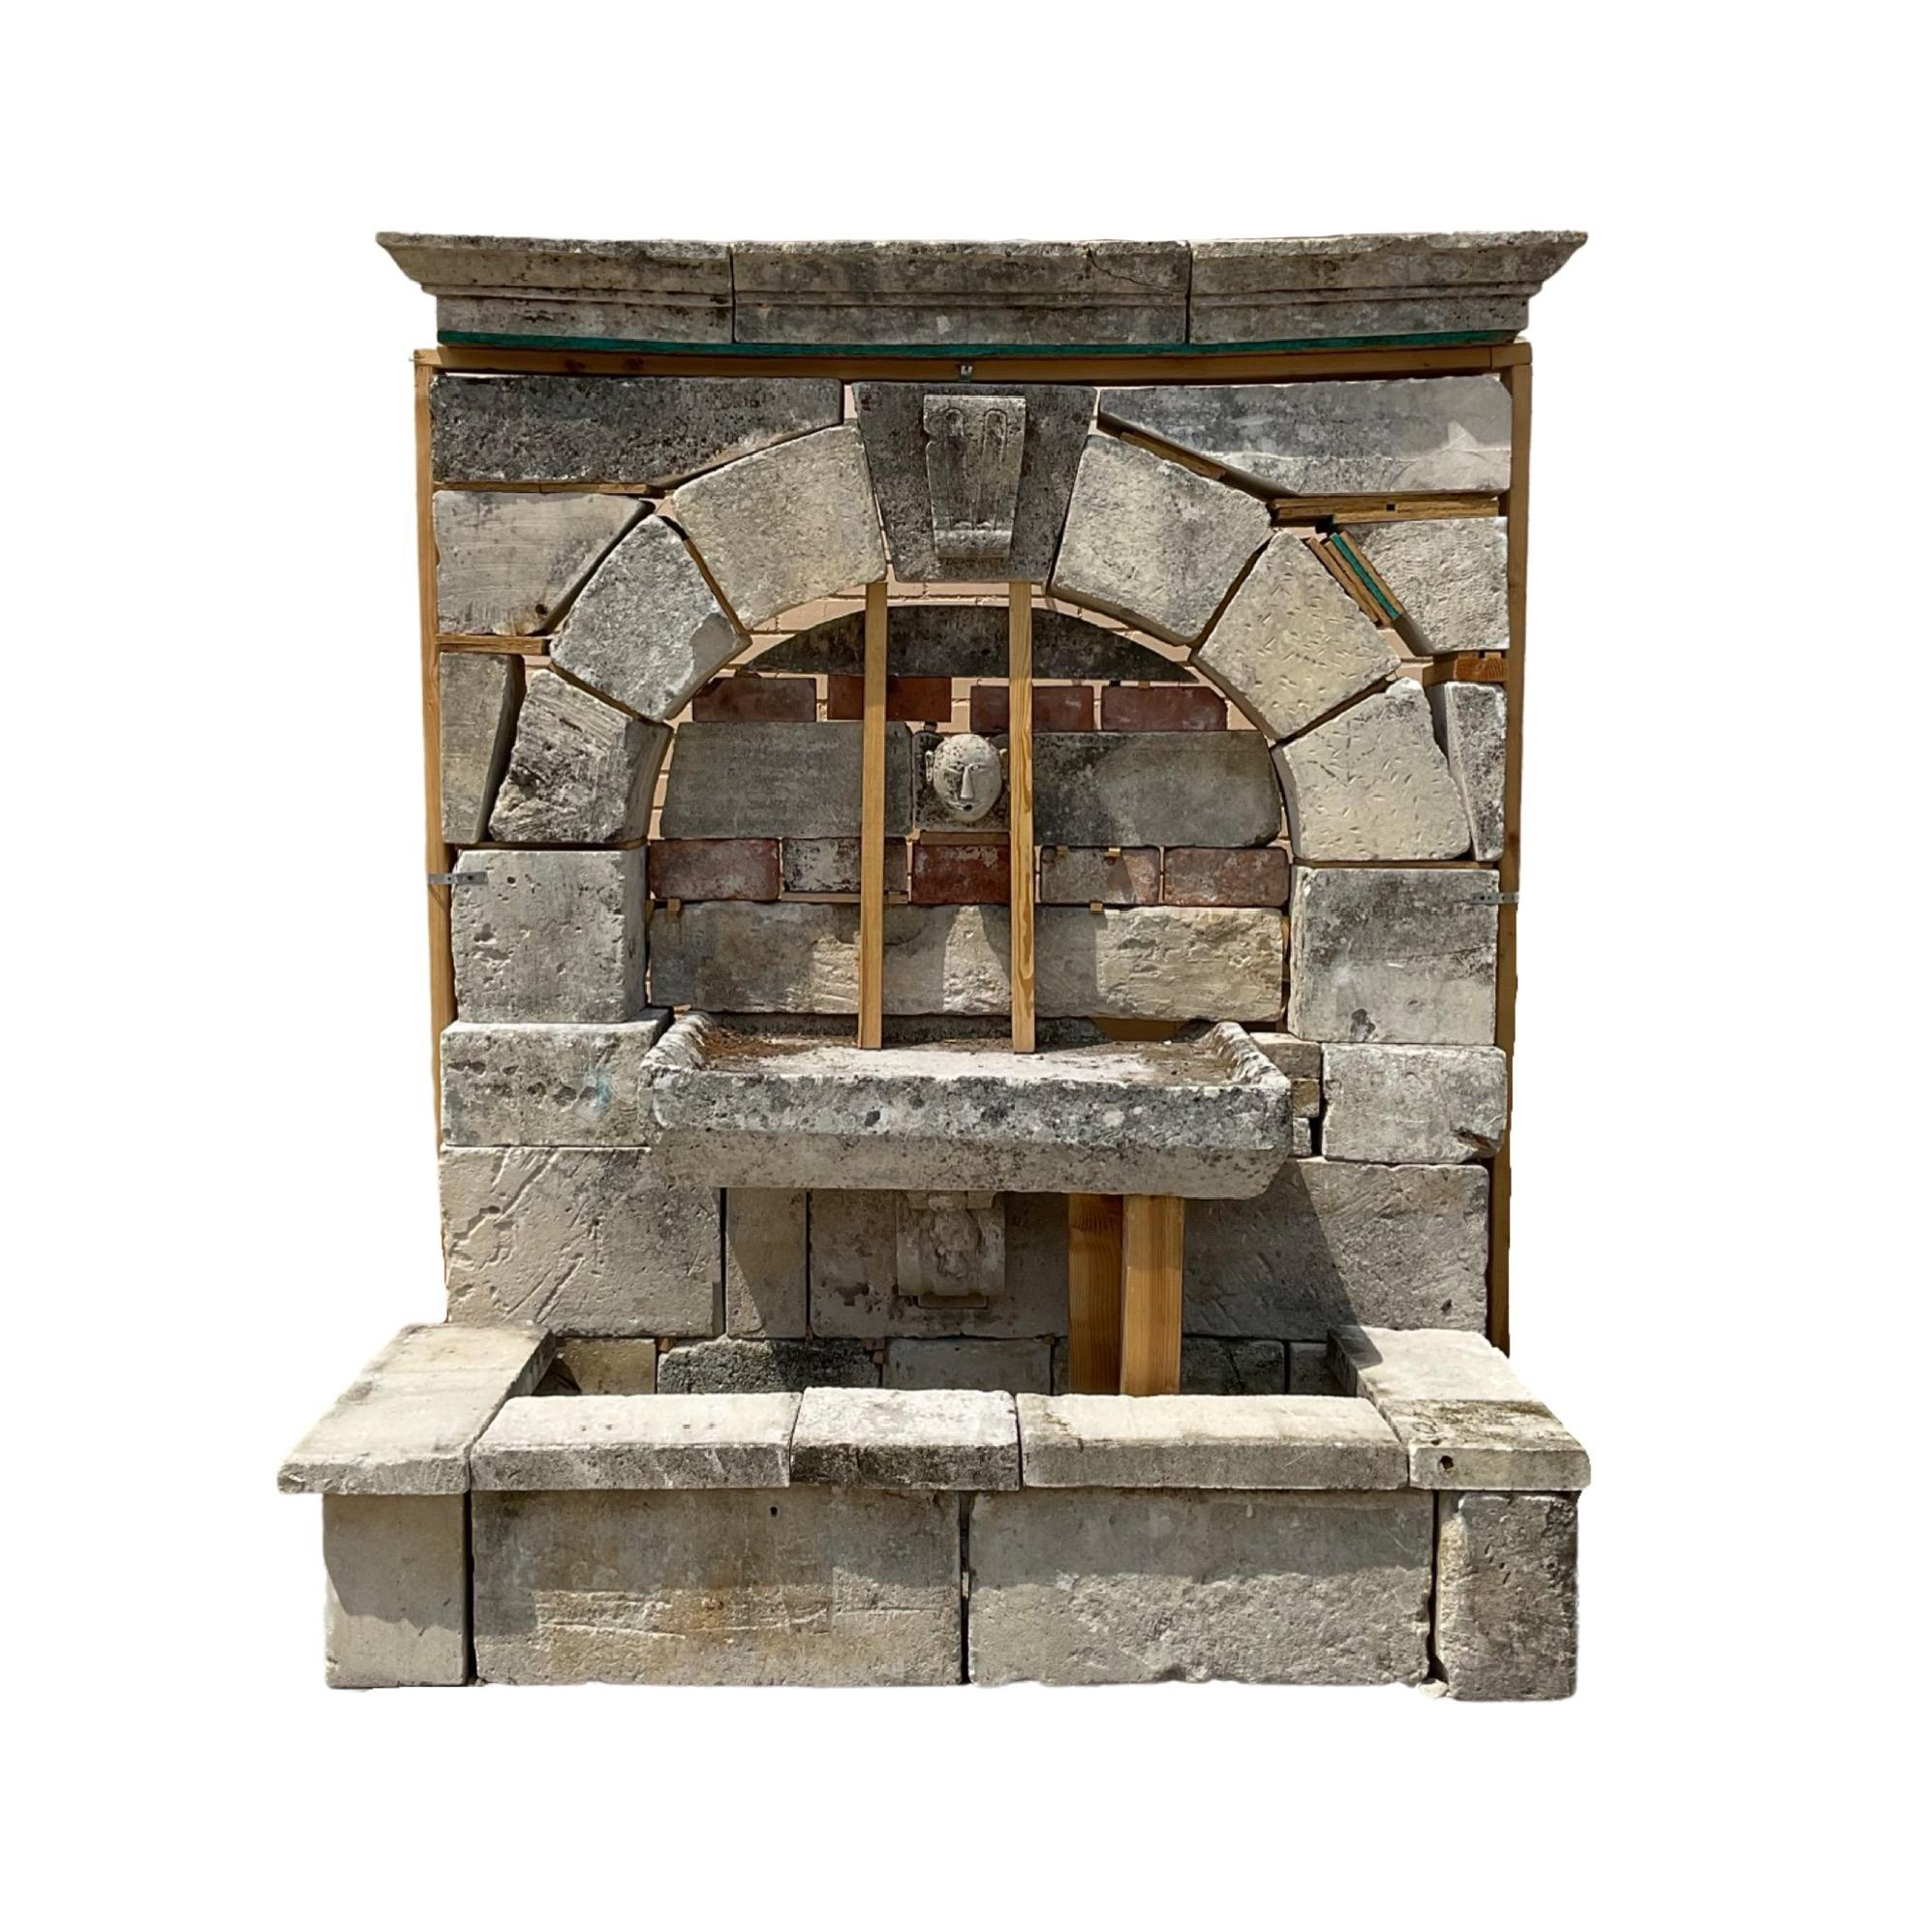 This French Limestone Wall Fountain from the 17th century is a stunning piece of craftsmanship. The antique fountain is made out of limestone, with a carved face sculpture in the center that serves as a water spout exit and a middle trough basin for